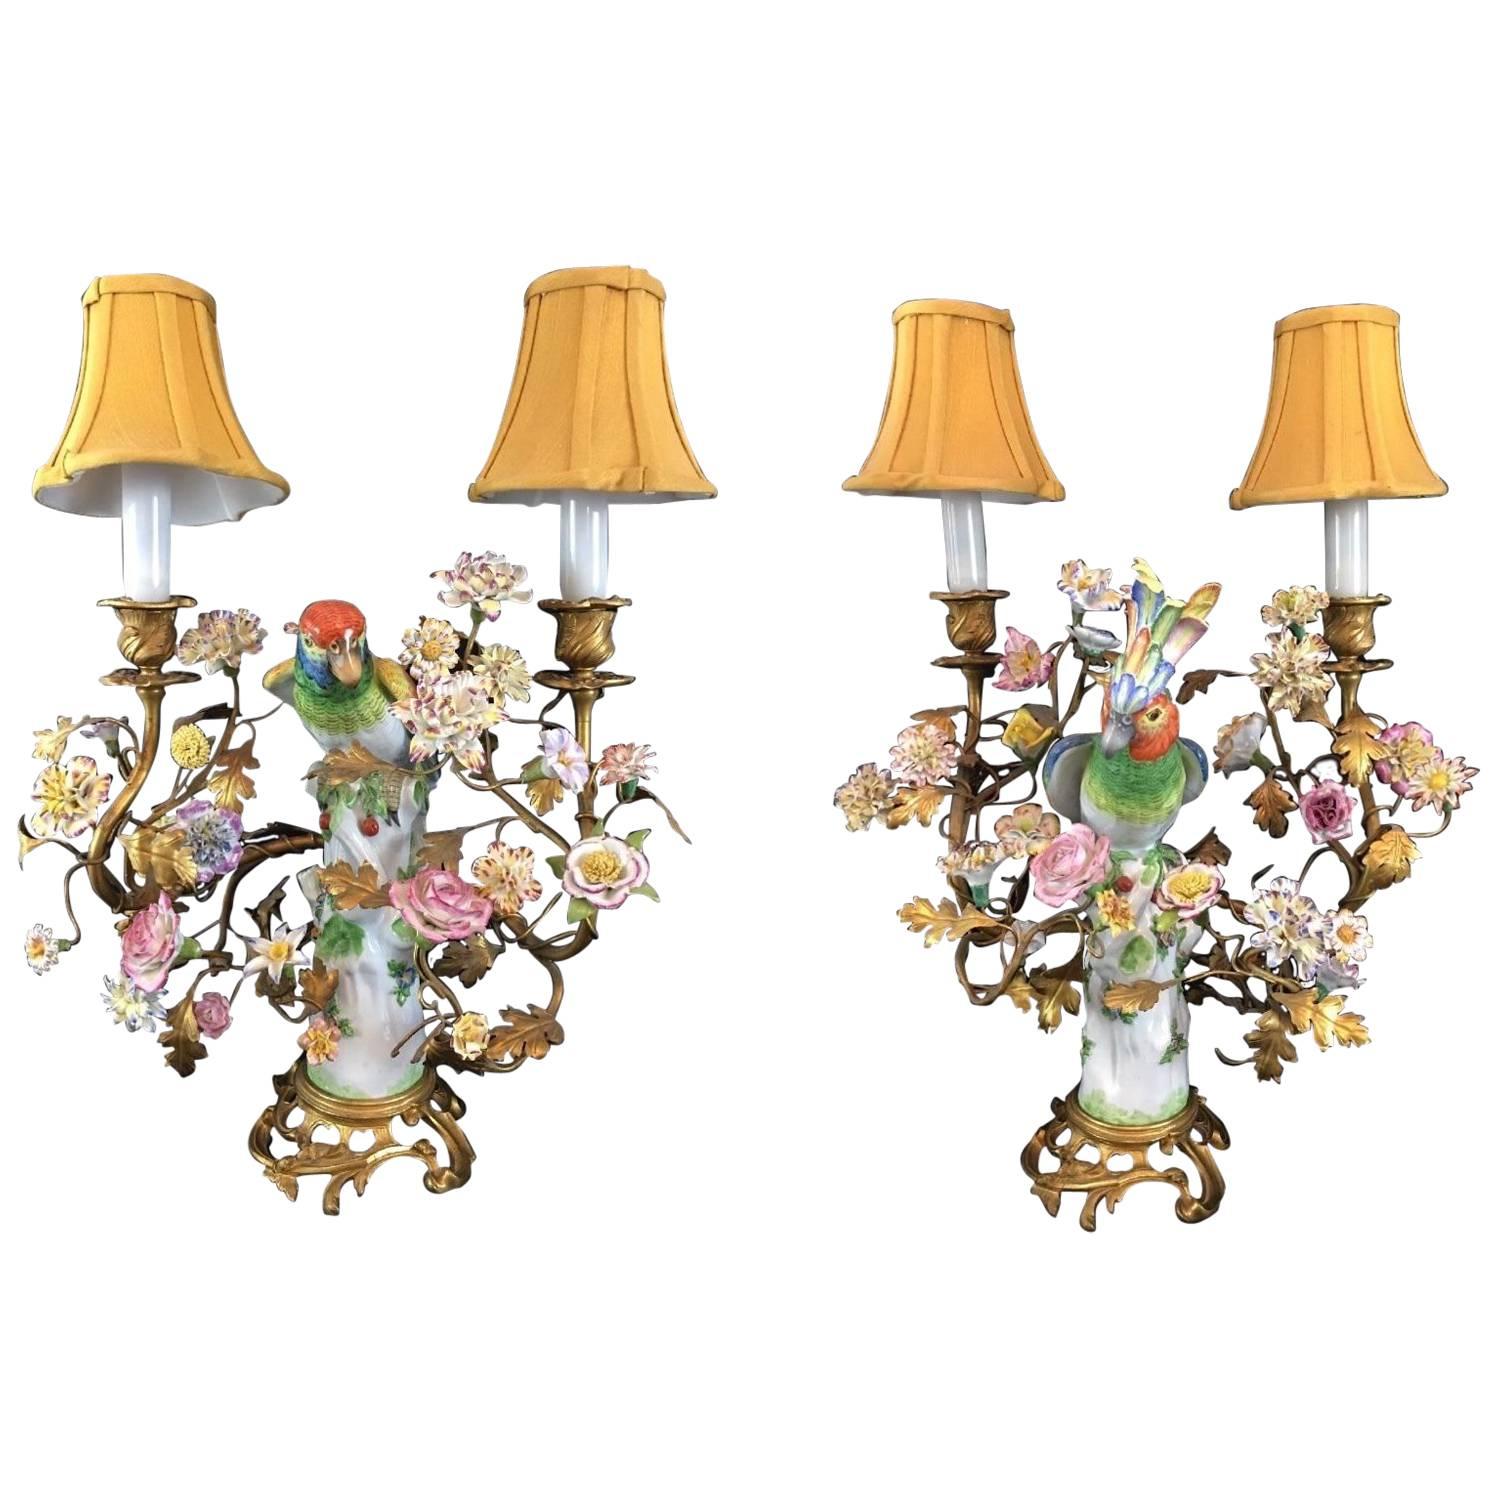 Pair of French/German Porcelain Parrot Lamps 19th Century, After Meissen